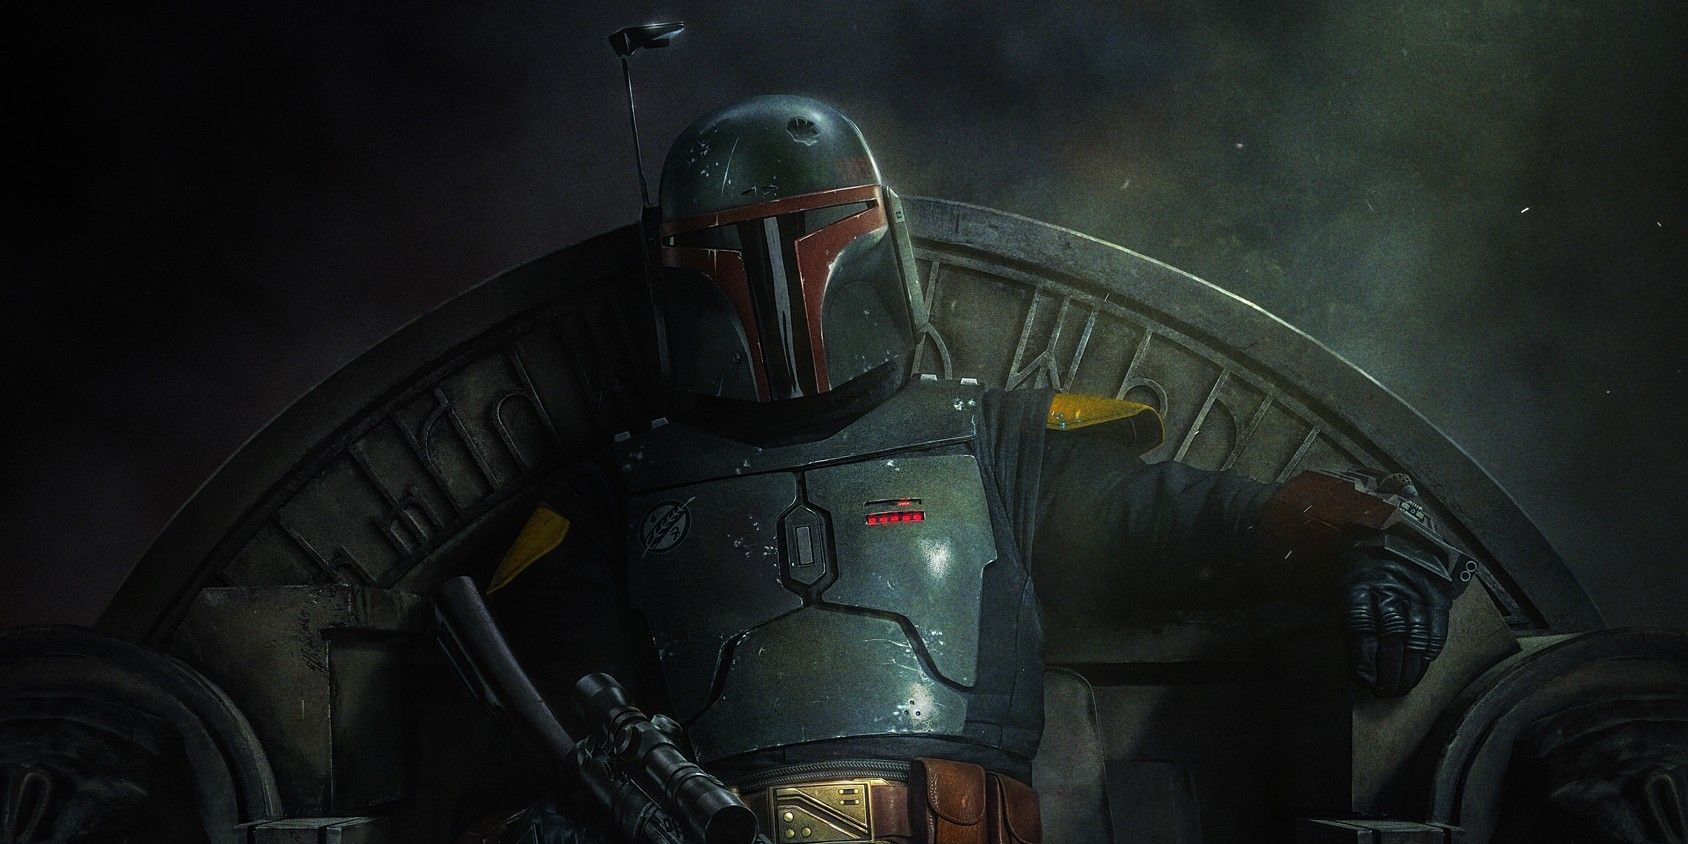 Boba Fett sitting on a chair in The Book Of Boba Fett